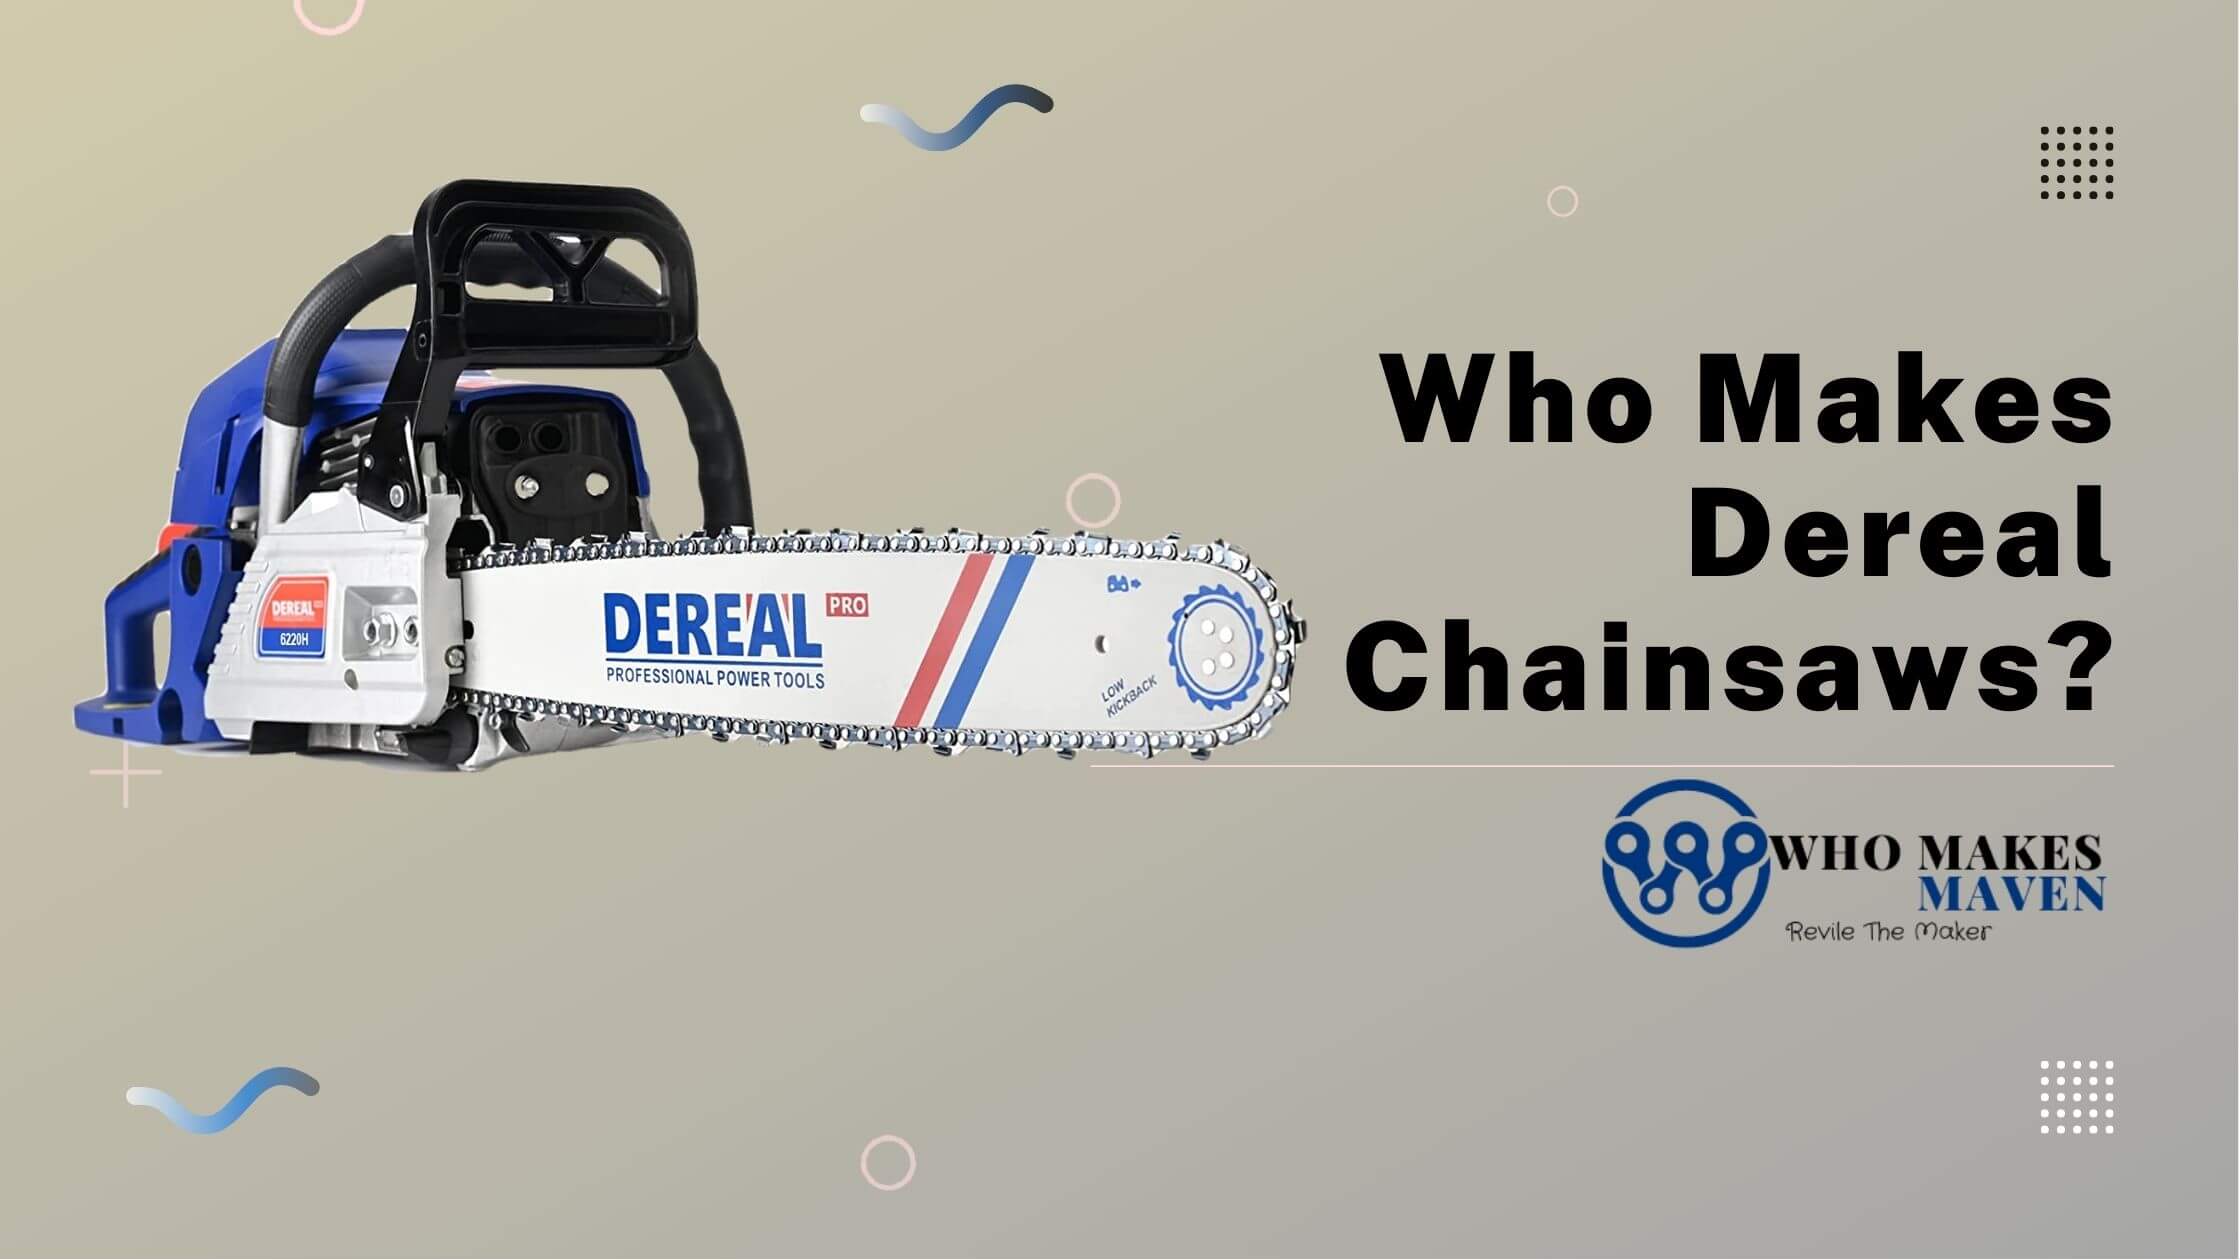 Who Makes Dereal Chainsaws